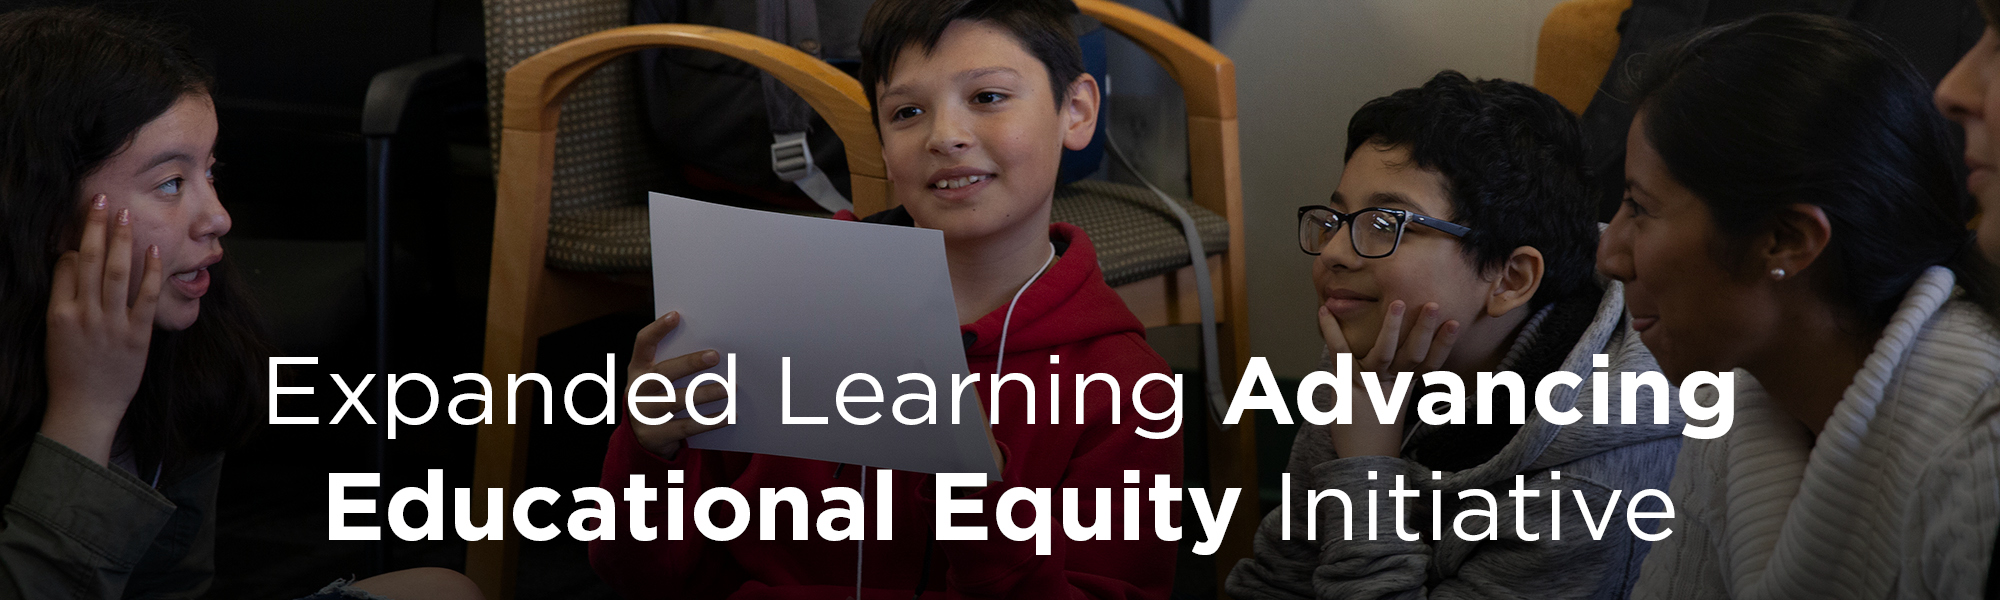 Expanded Learning Advancing Educational Equity Initiative